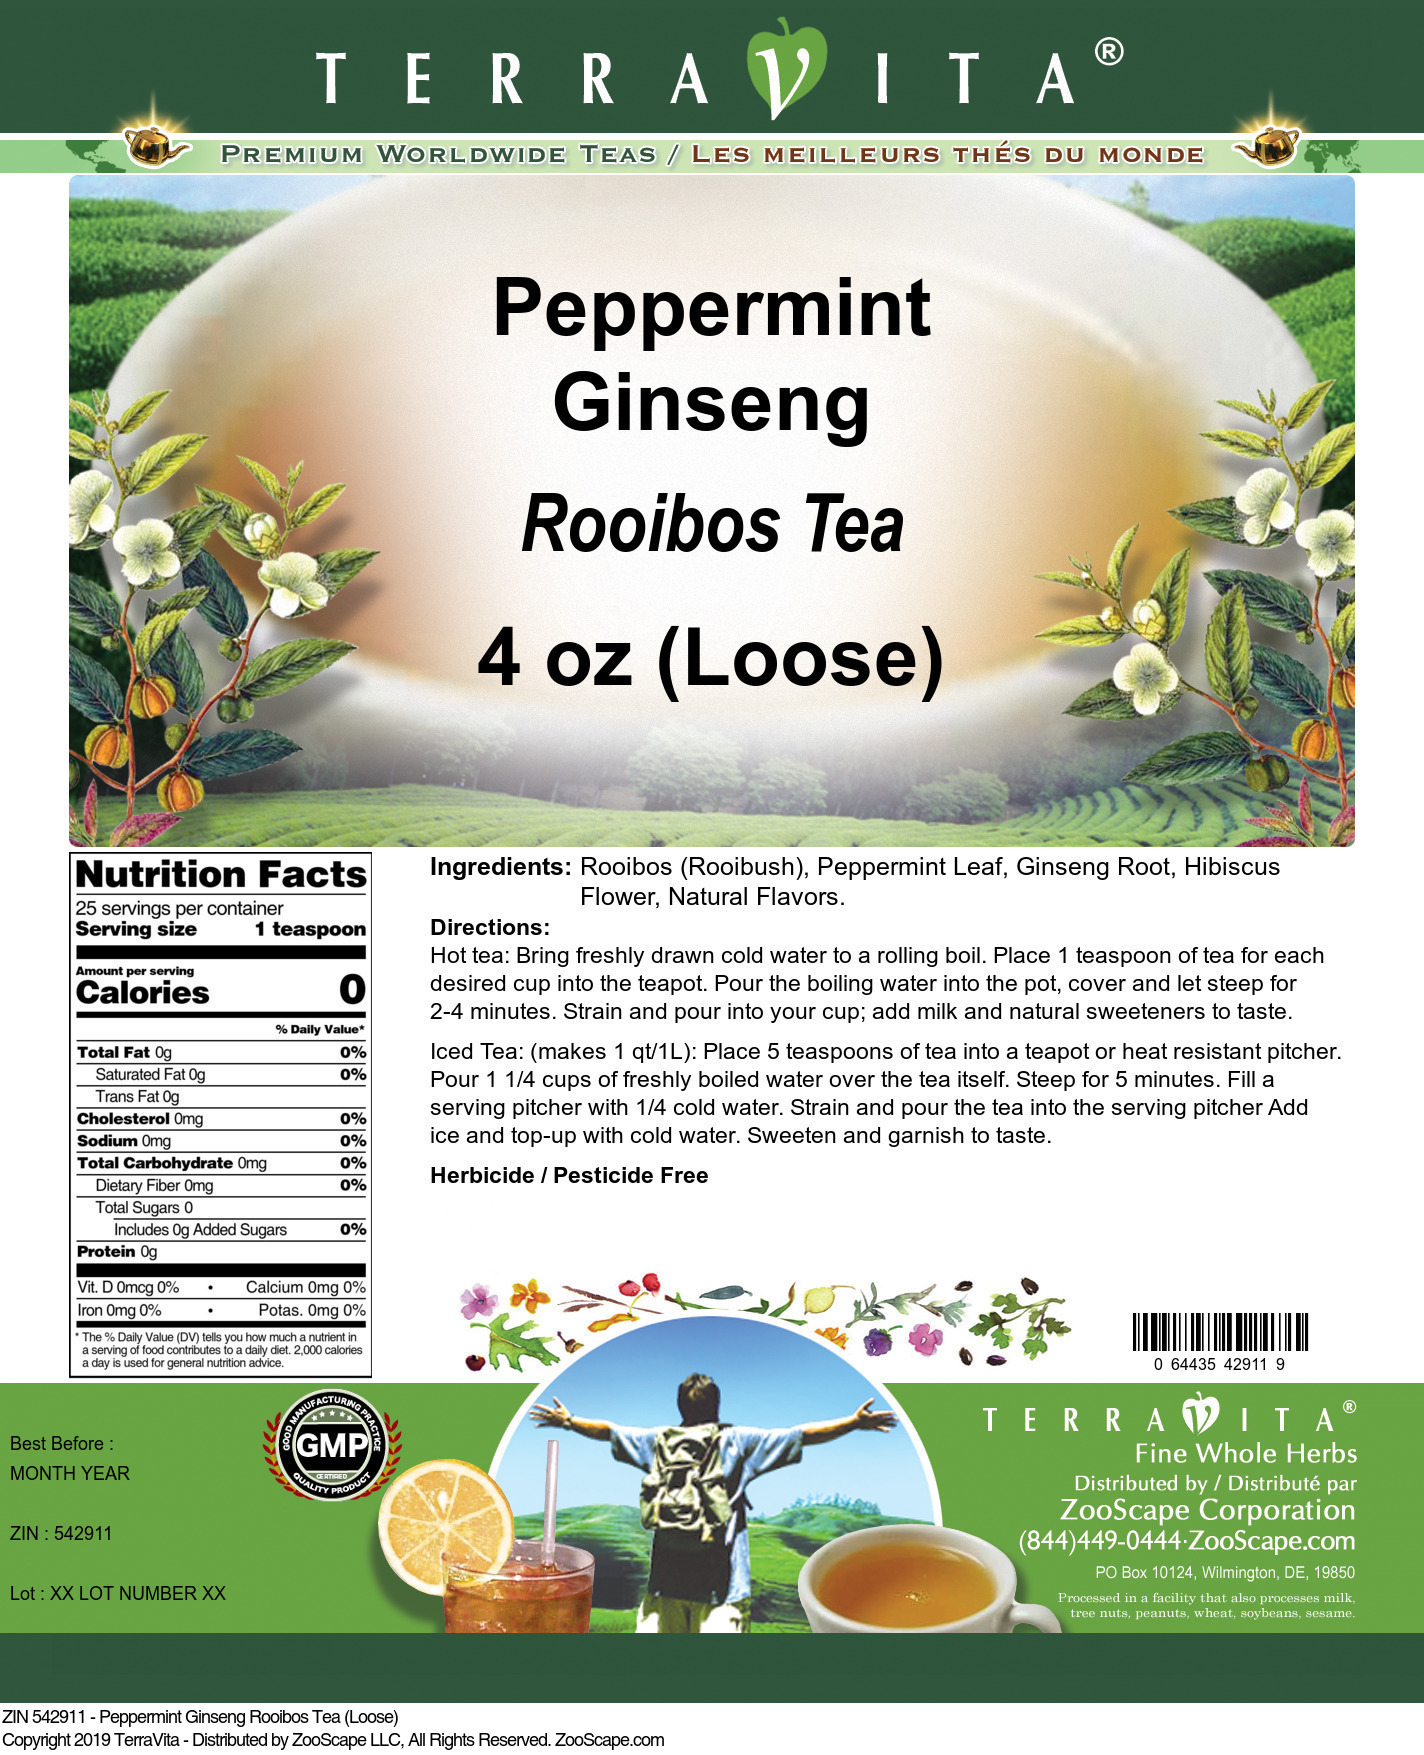 Peppermint Ginseng Rooibos Tea (Loose) - Label